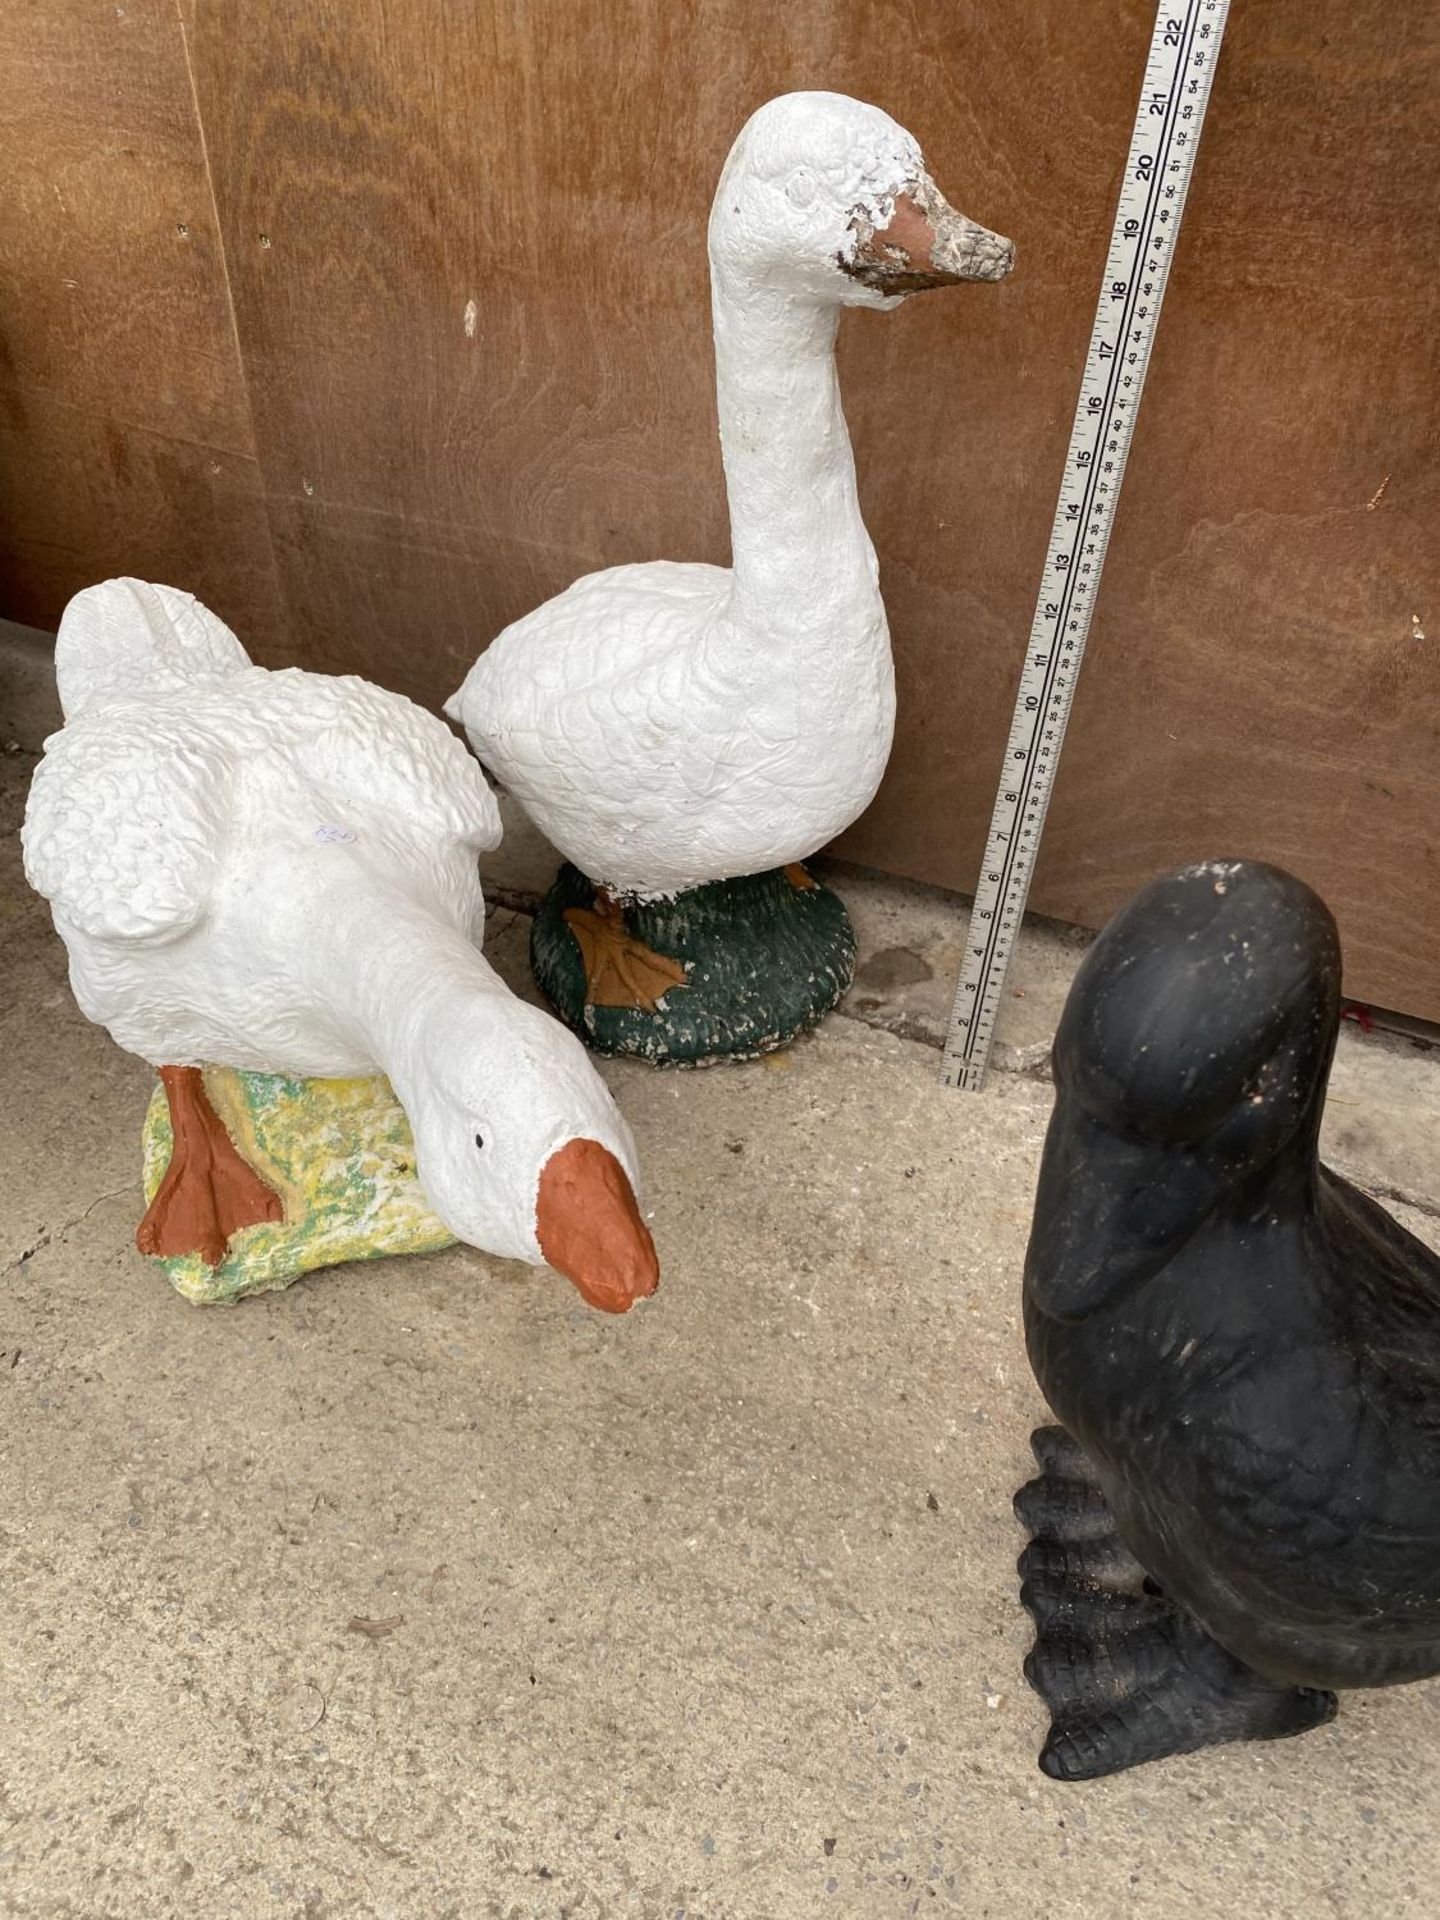 A PAIR OF RECONSTITUTED STONE GEESE AND A POT DUCK - Image 2 of 6